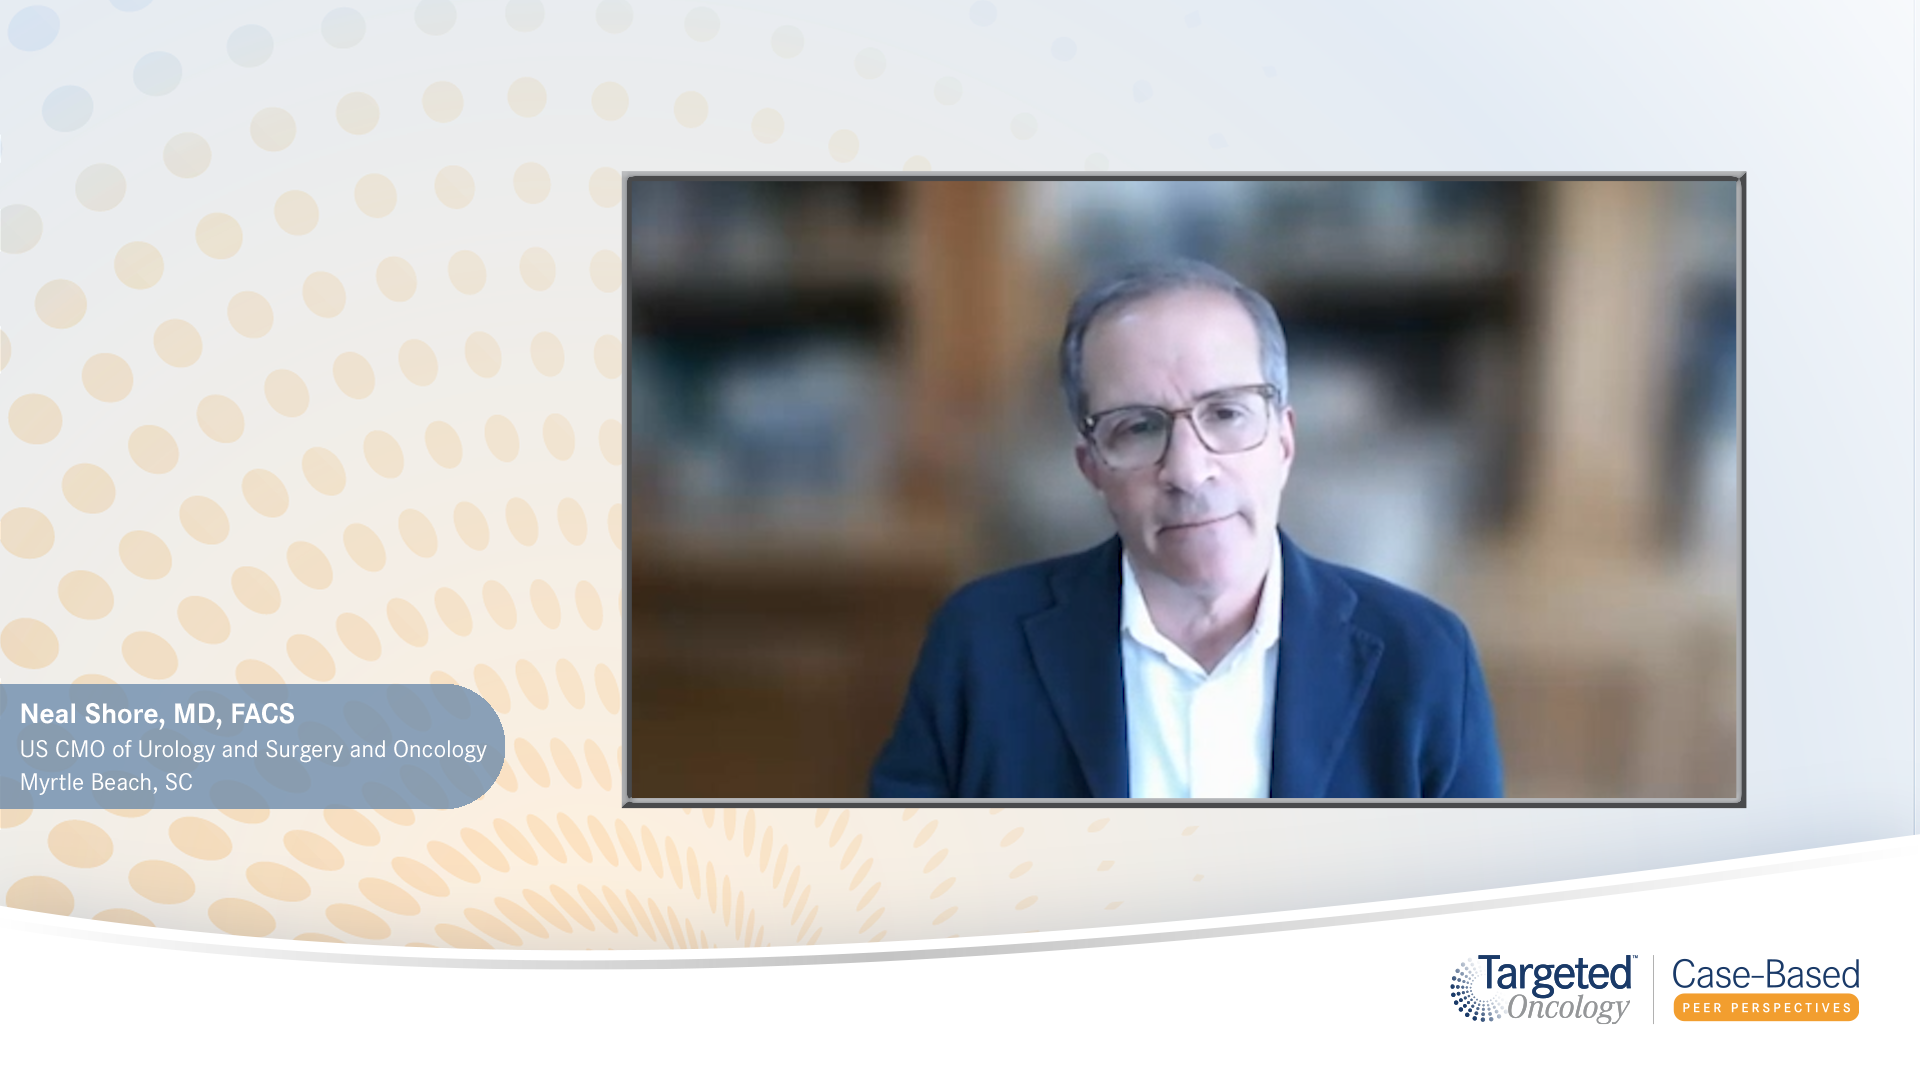 Video 5 - "Addressing Unmet Needs and Final Perspectives on nmCRPC"